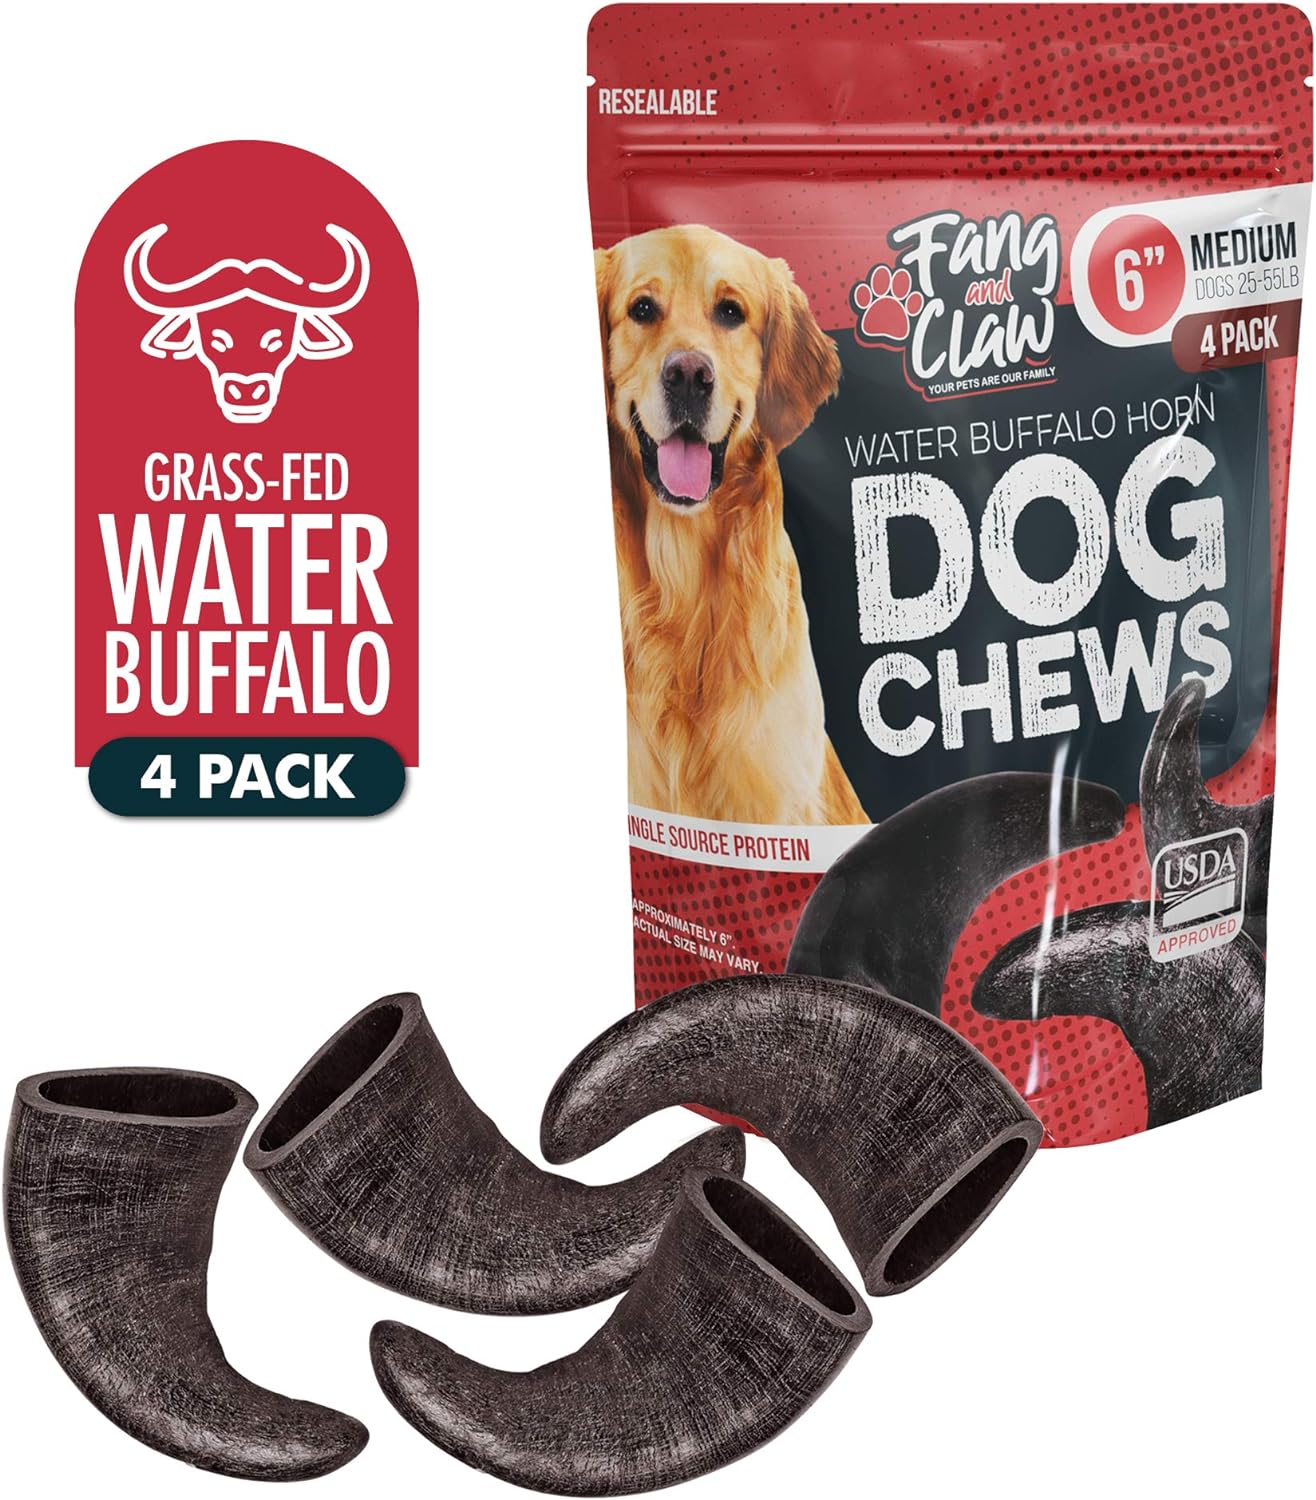 Water Buffalo Horn Dog Chew 4 Pack - Medium 6" - All Natural Free Range Grass Fed Single Source Protein - No Chemicals, Additives, Hormones - Long Lasting, Good for Aggressive Chewers – by Fang & Claw